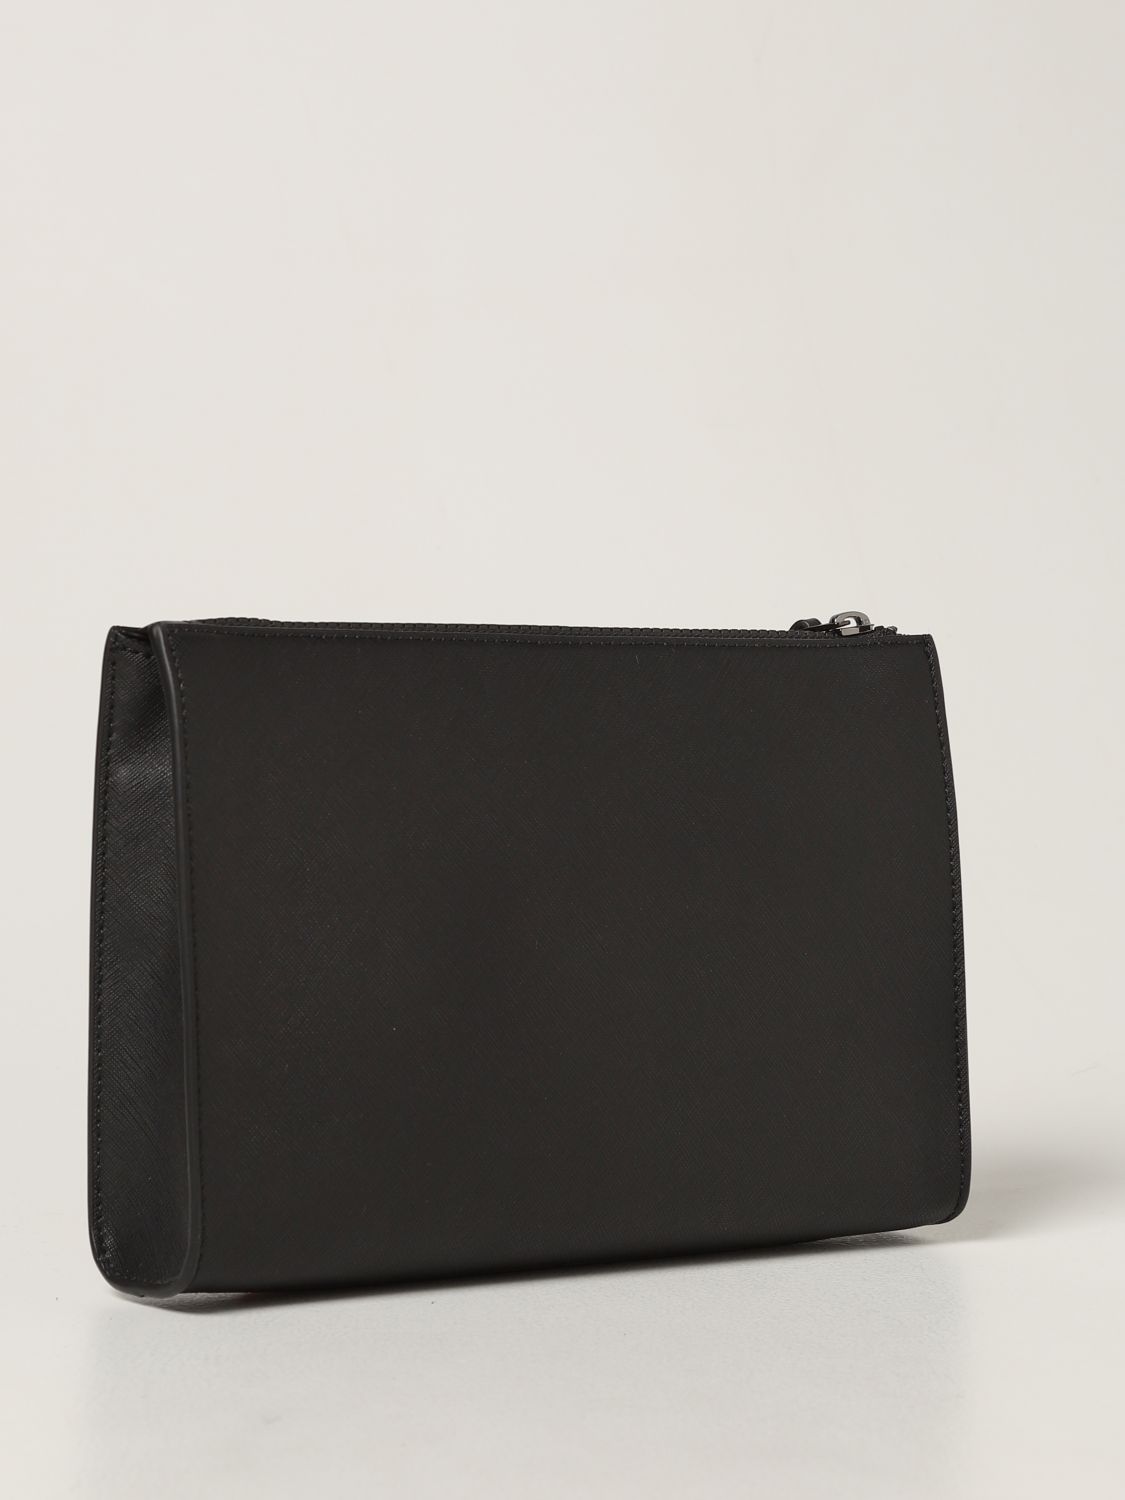 Clutches & Portfolios  Makid - Recycled Leather Clutch Bag In Black - Bally  Mens - Dramponga